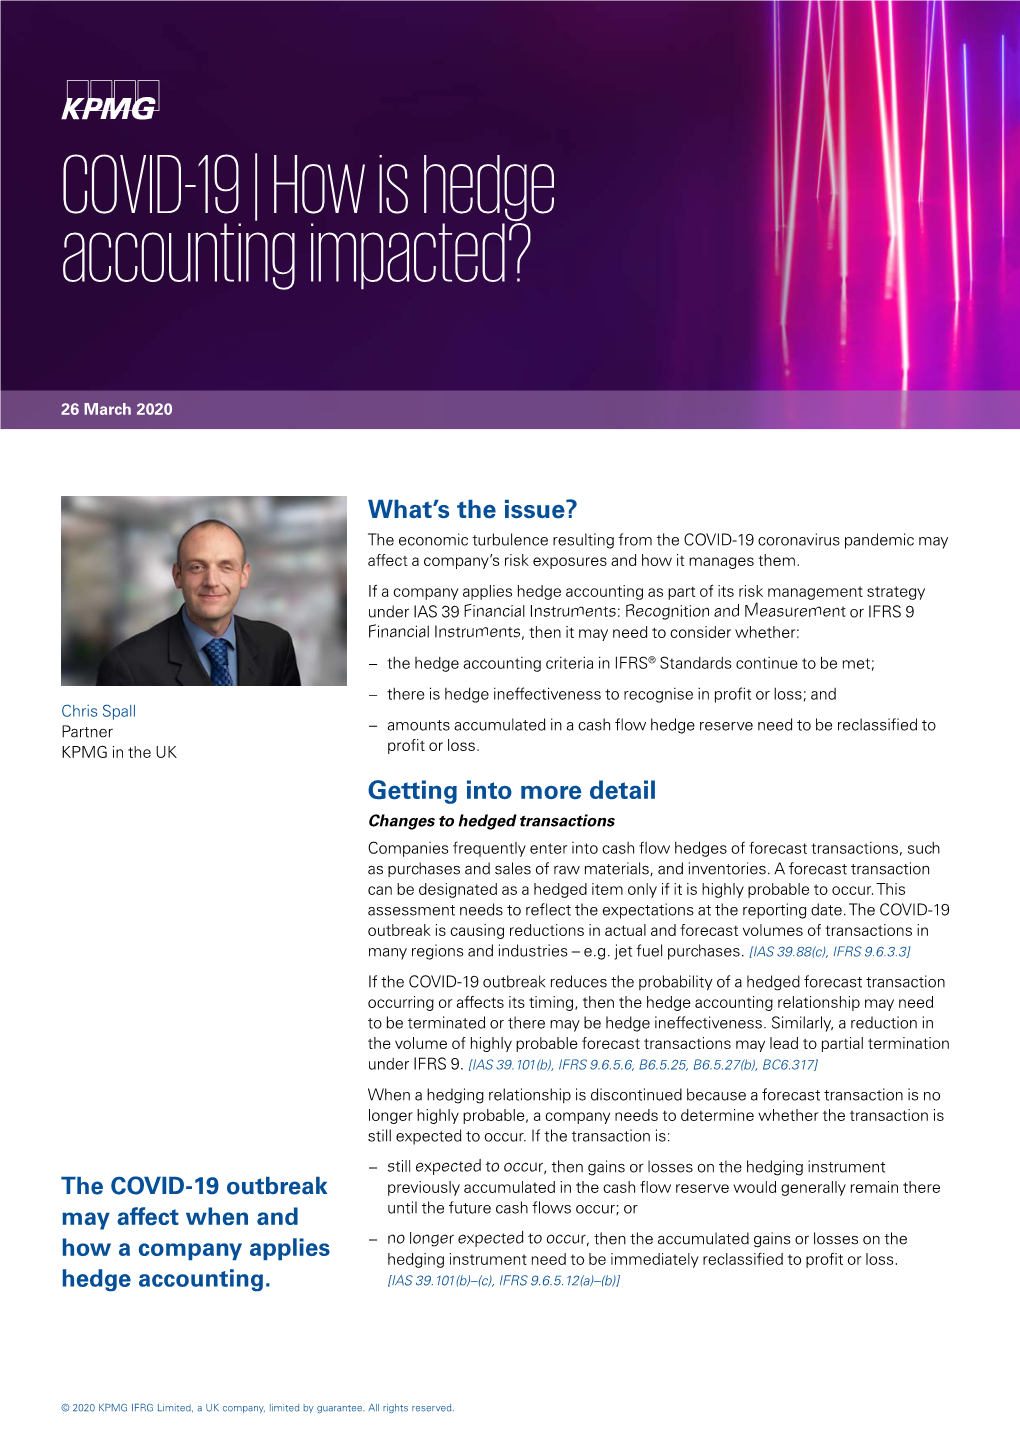 COVID-19 | How Is Hedge Accounting Impacted?